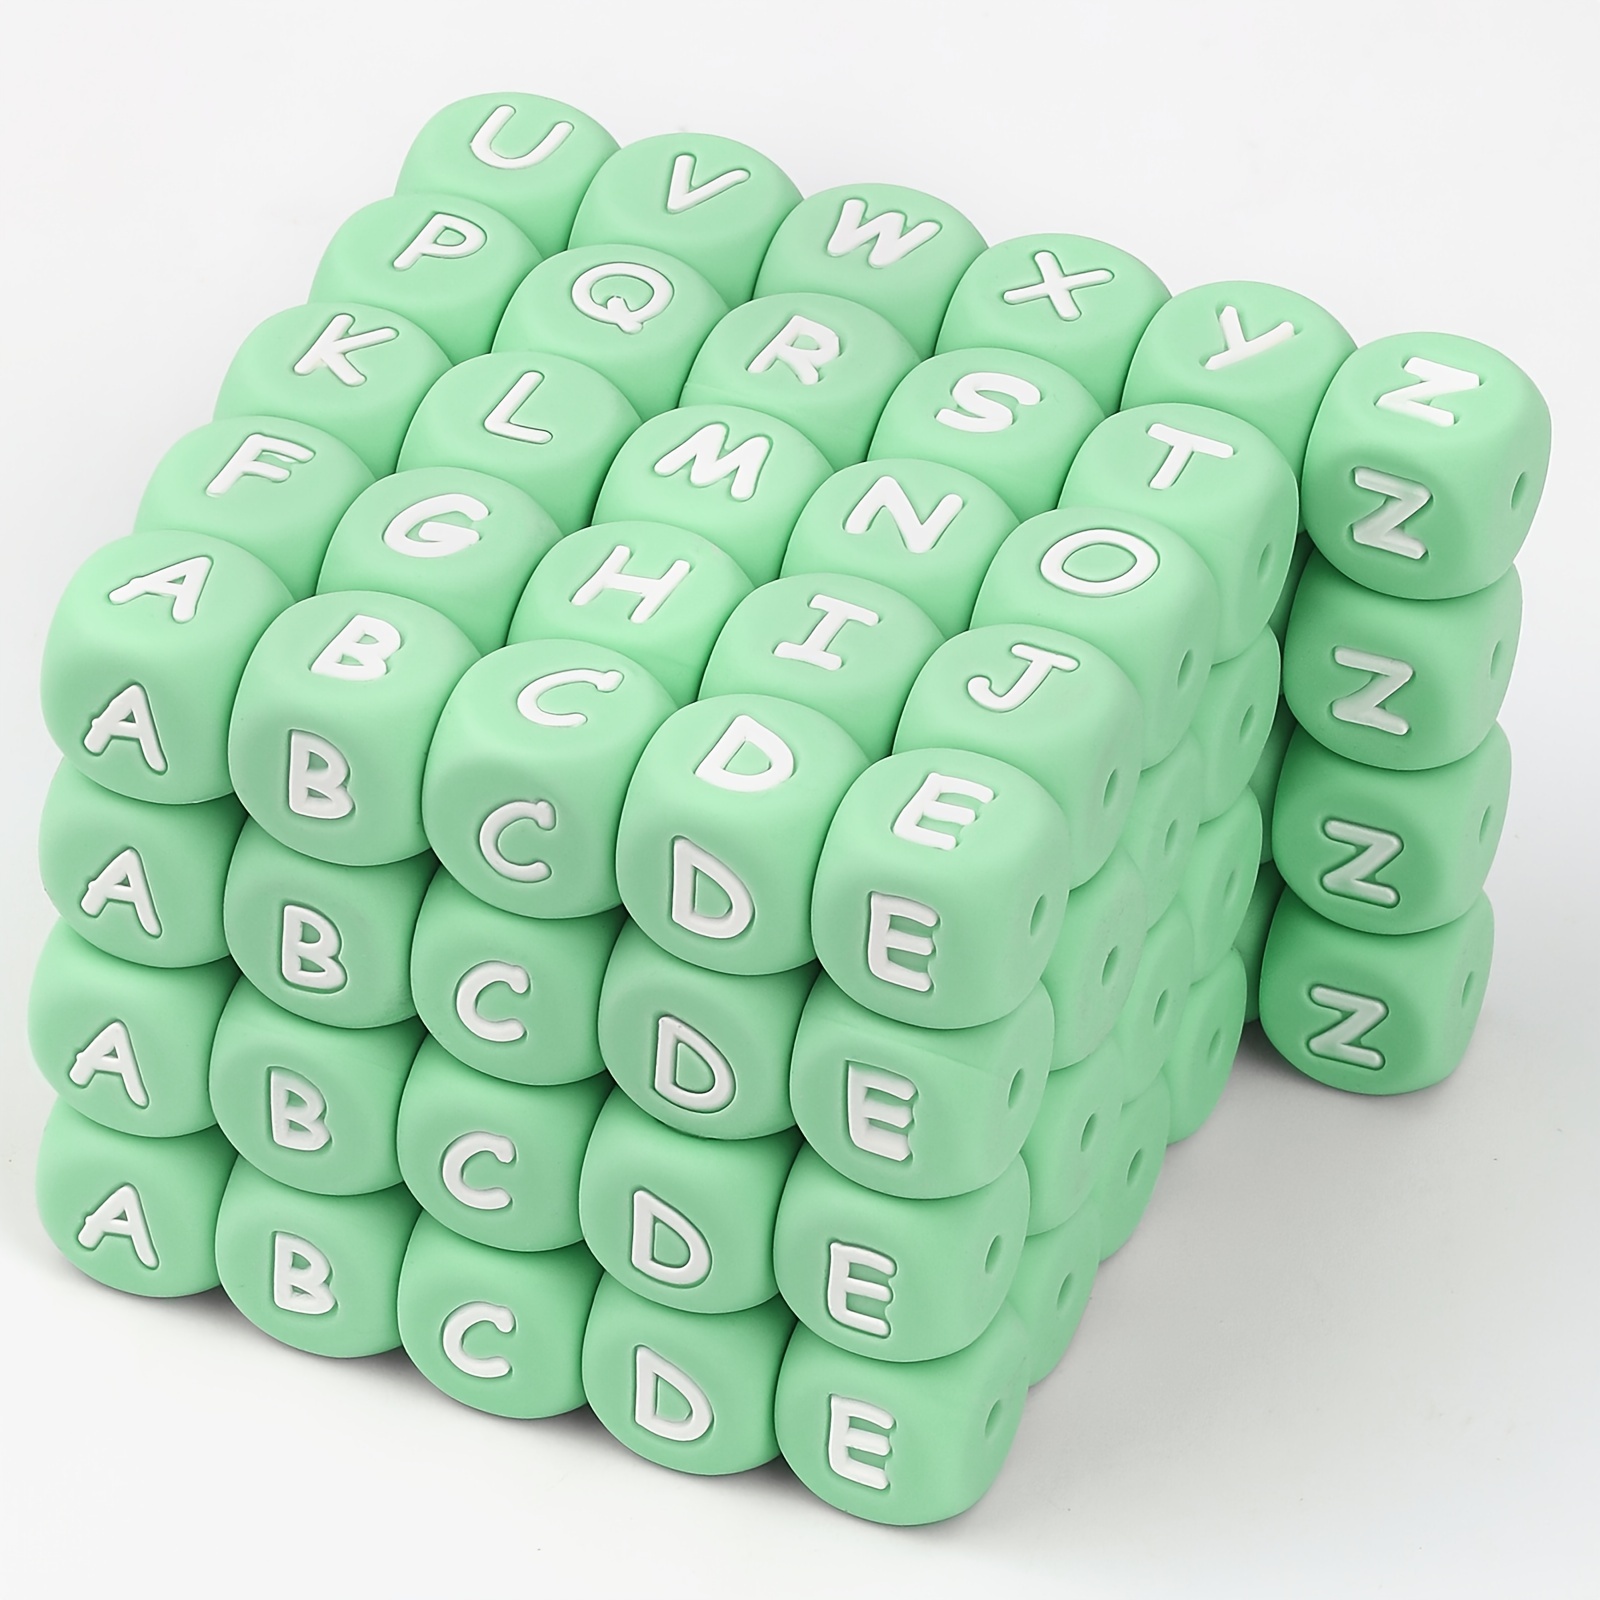 1 piece 12mm silicone letter bead food grade silicone alphabet bead in mint  green